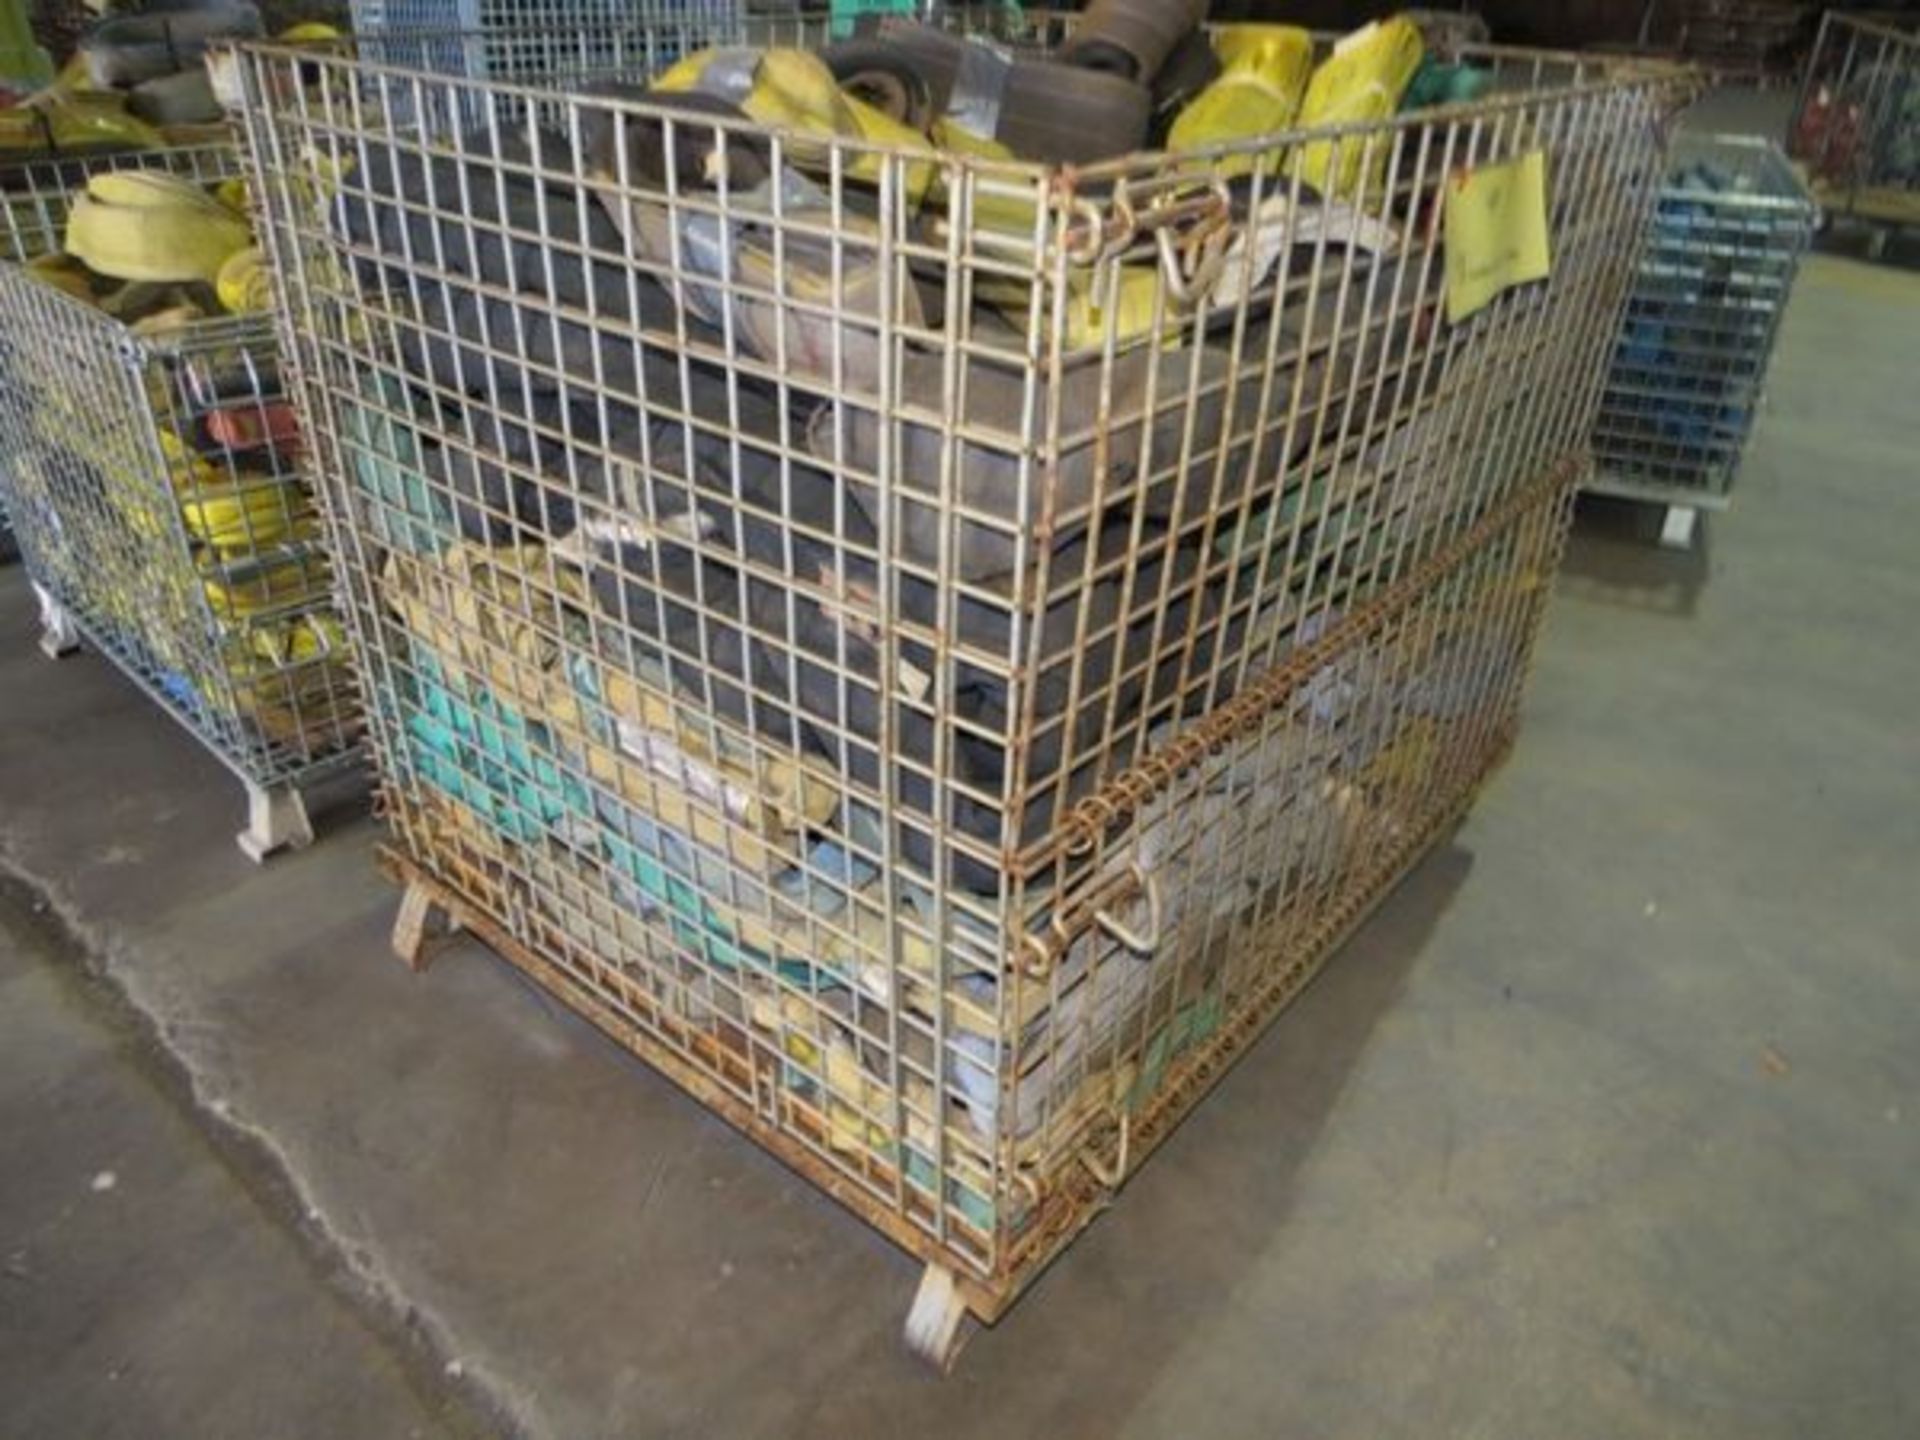 Warehouse Basket- MFR - Unknown 4' x 40" x 42" **Contents SOLD Separately in Lot #1191** - Image 3 of 7